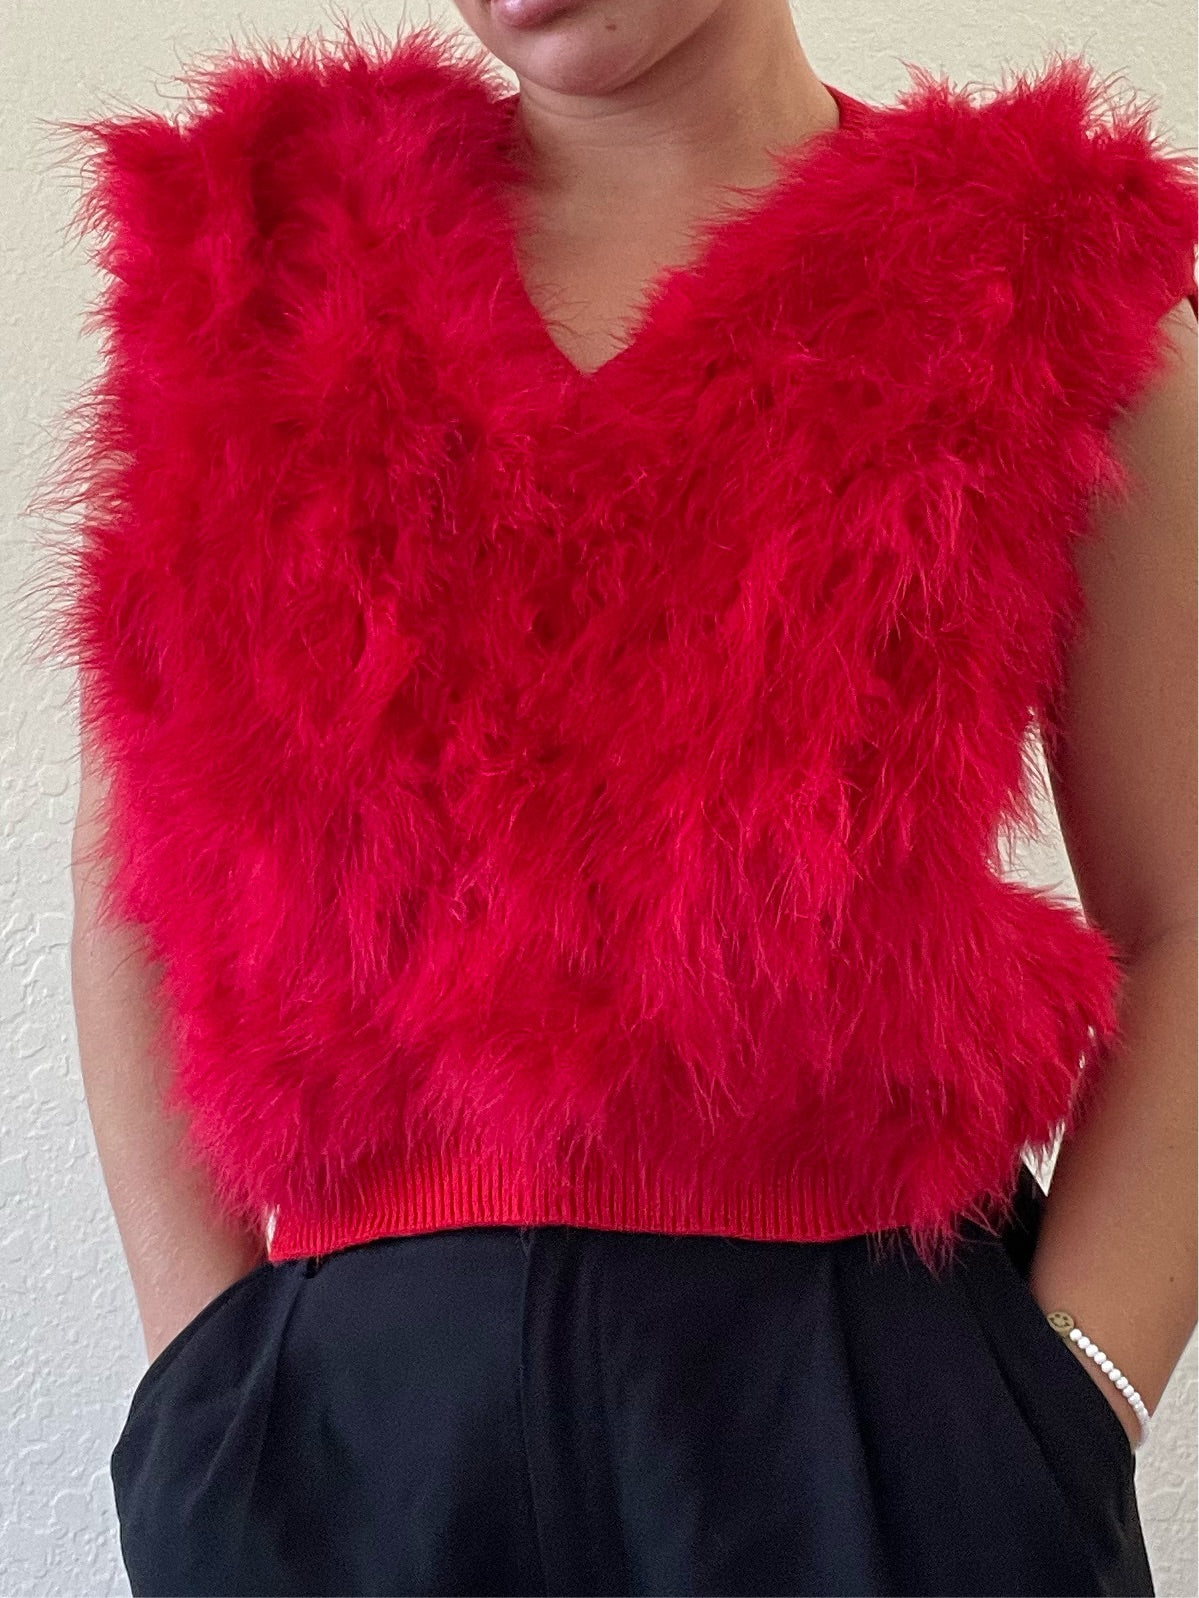 Red feather vest